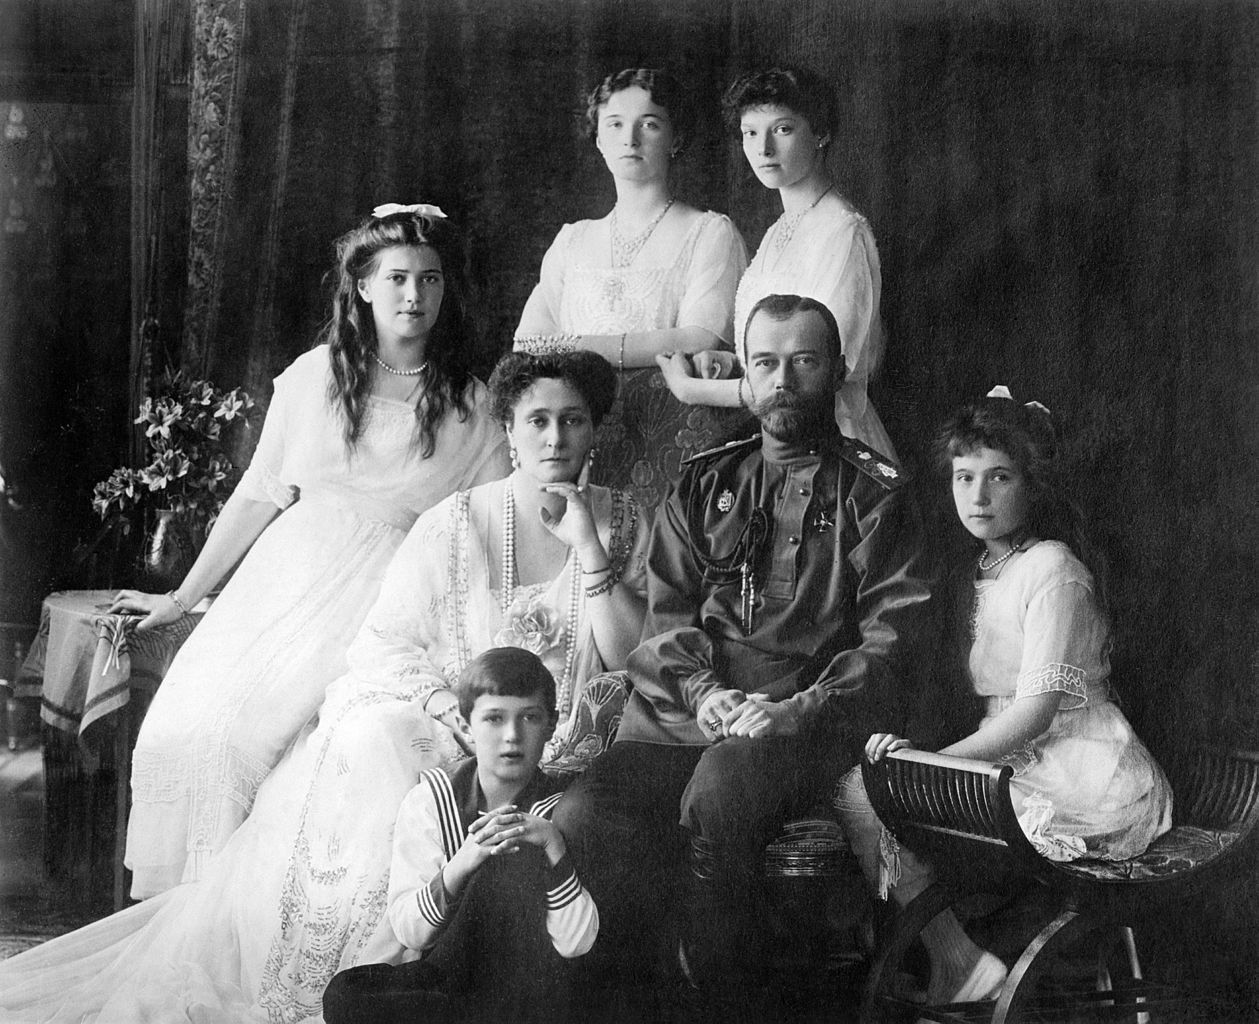 Nicholas II with his wife and children
